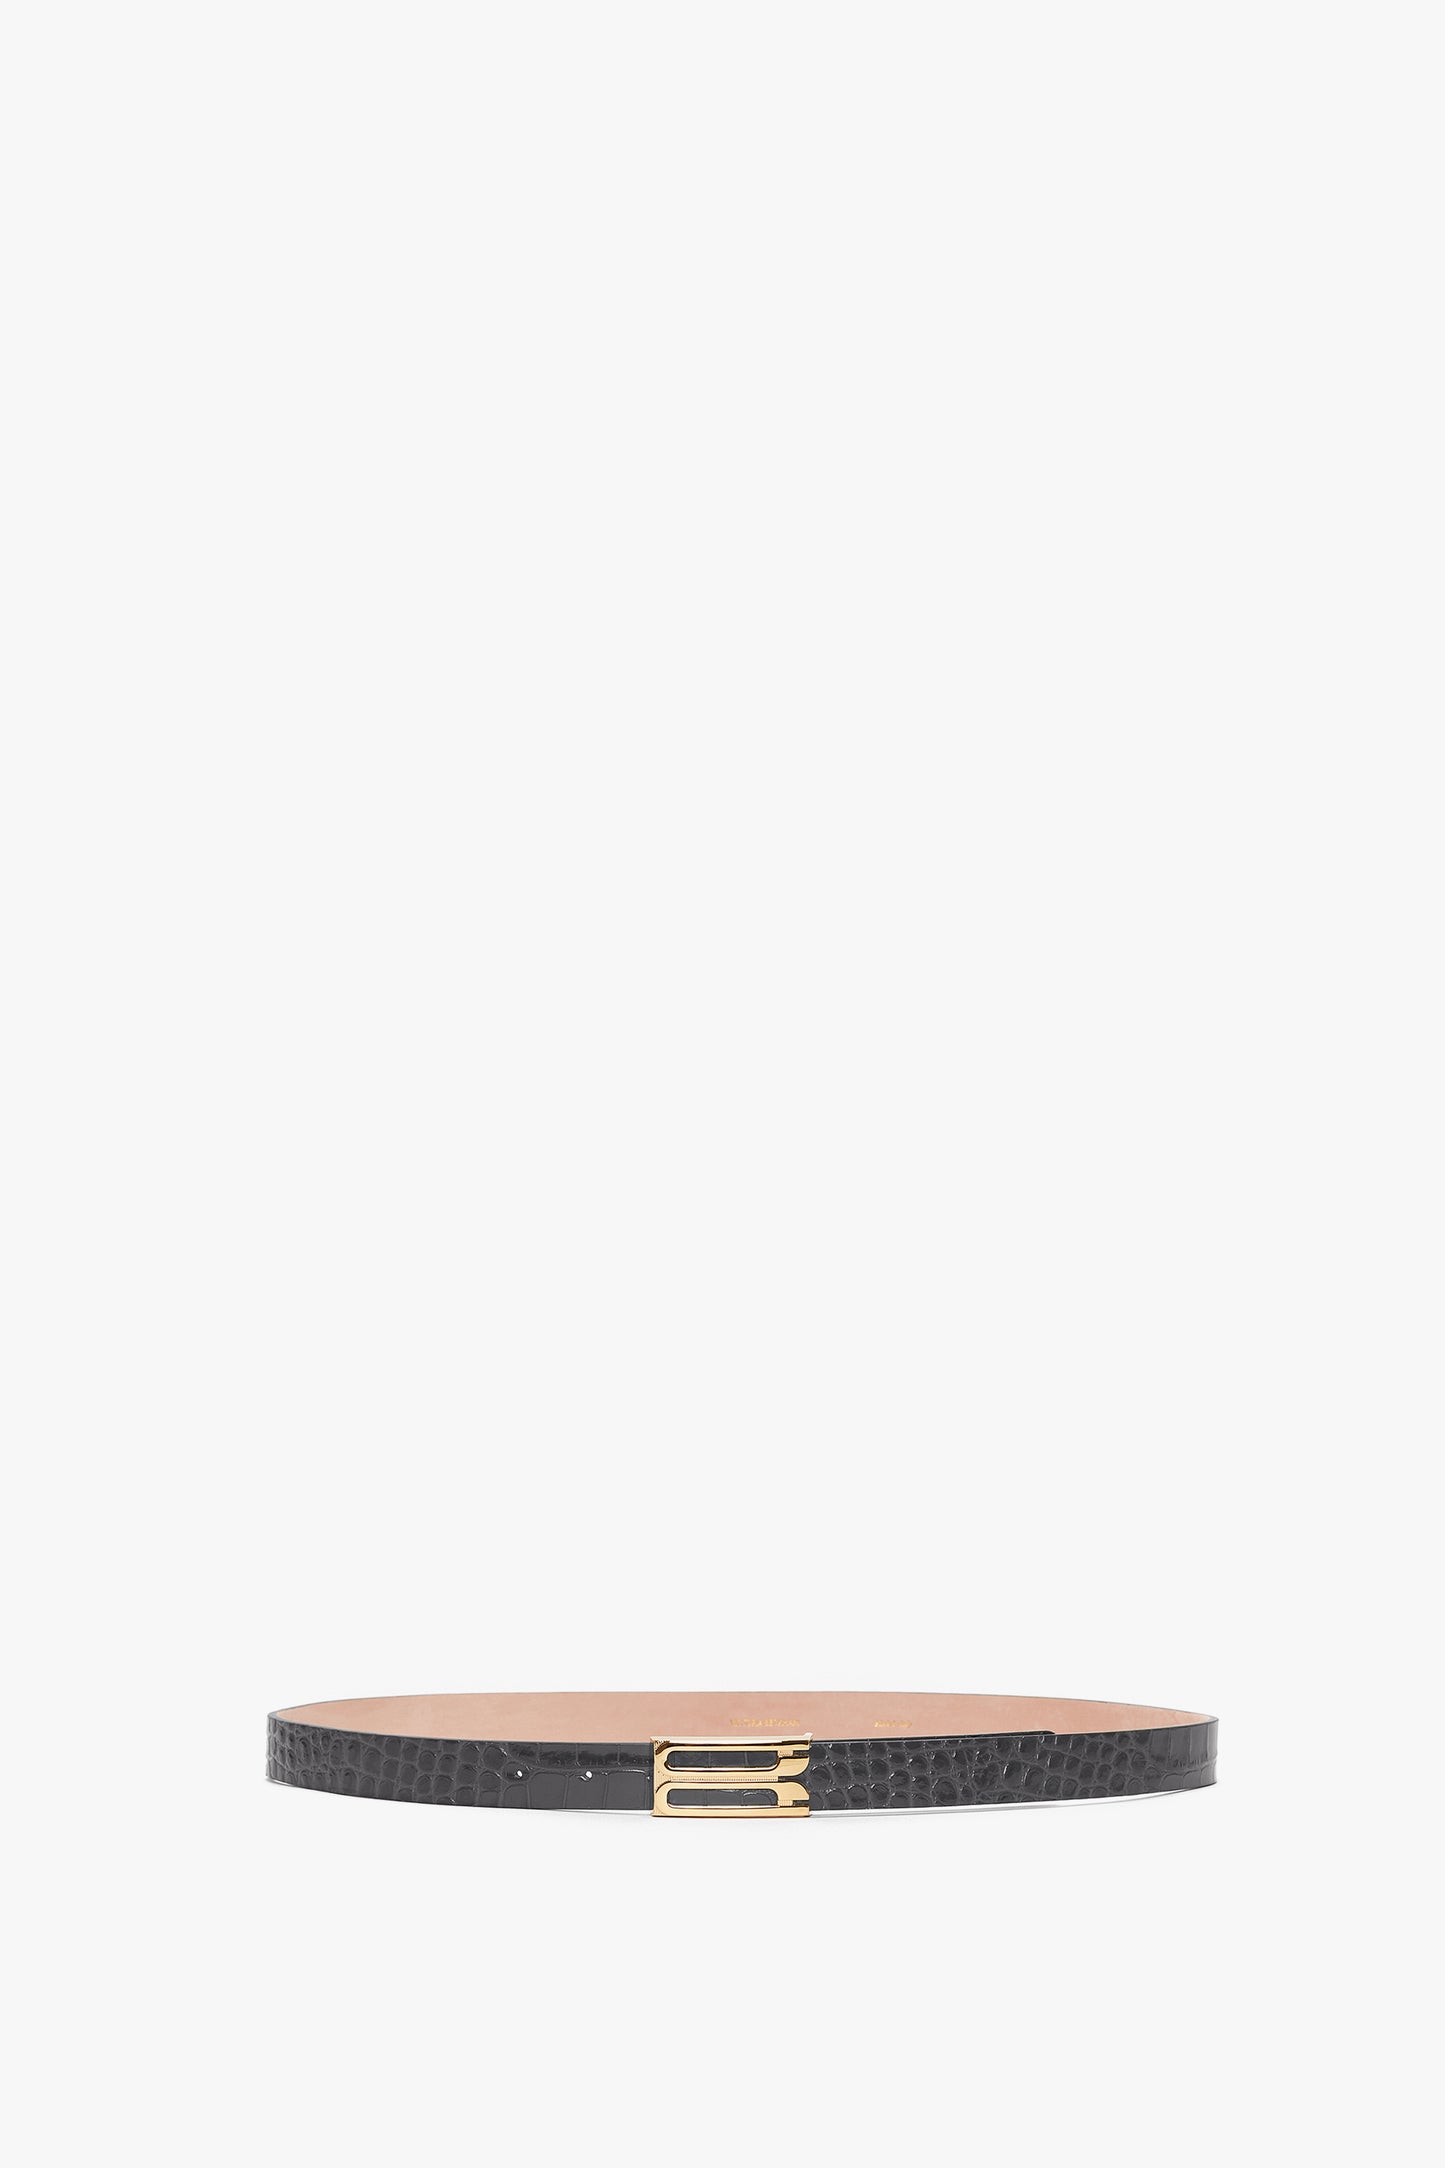 A slim **Frame Belt In Slate Grey Croc Embossed Calf Leather** made from croc-embossed calf leather, featuring a textured pattern and a rectangular gold buckle with elegant gold hardware.